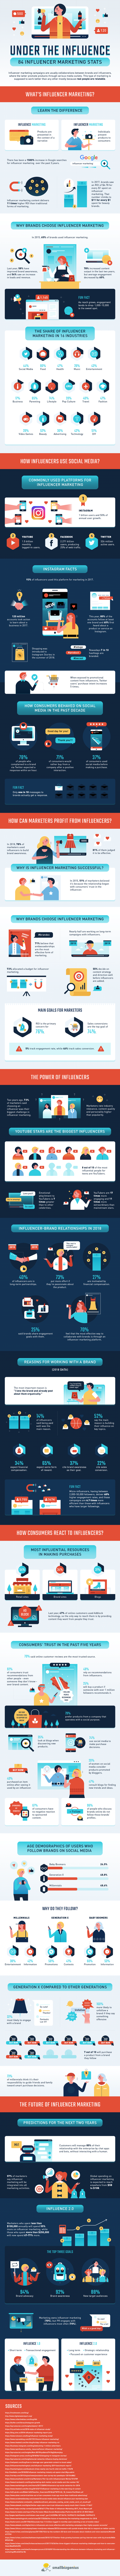 influencer marketing strategy - infographic